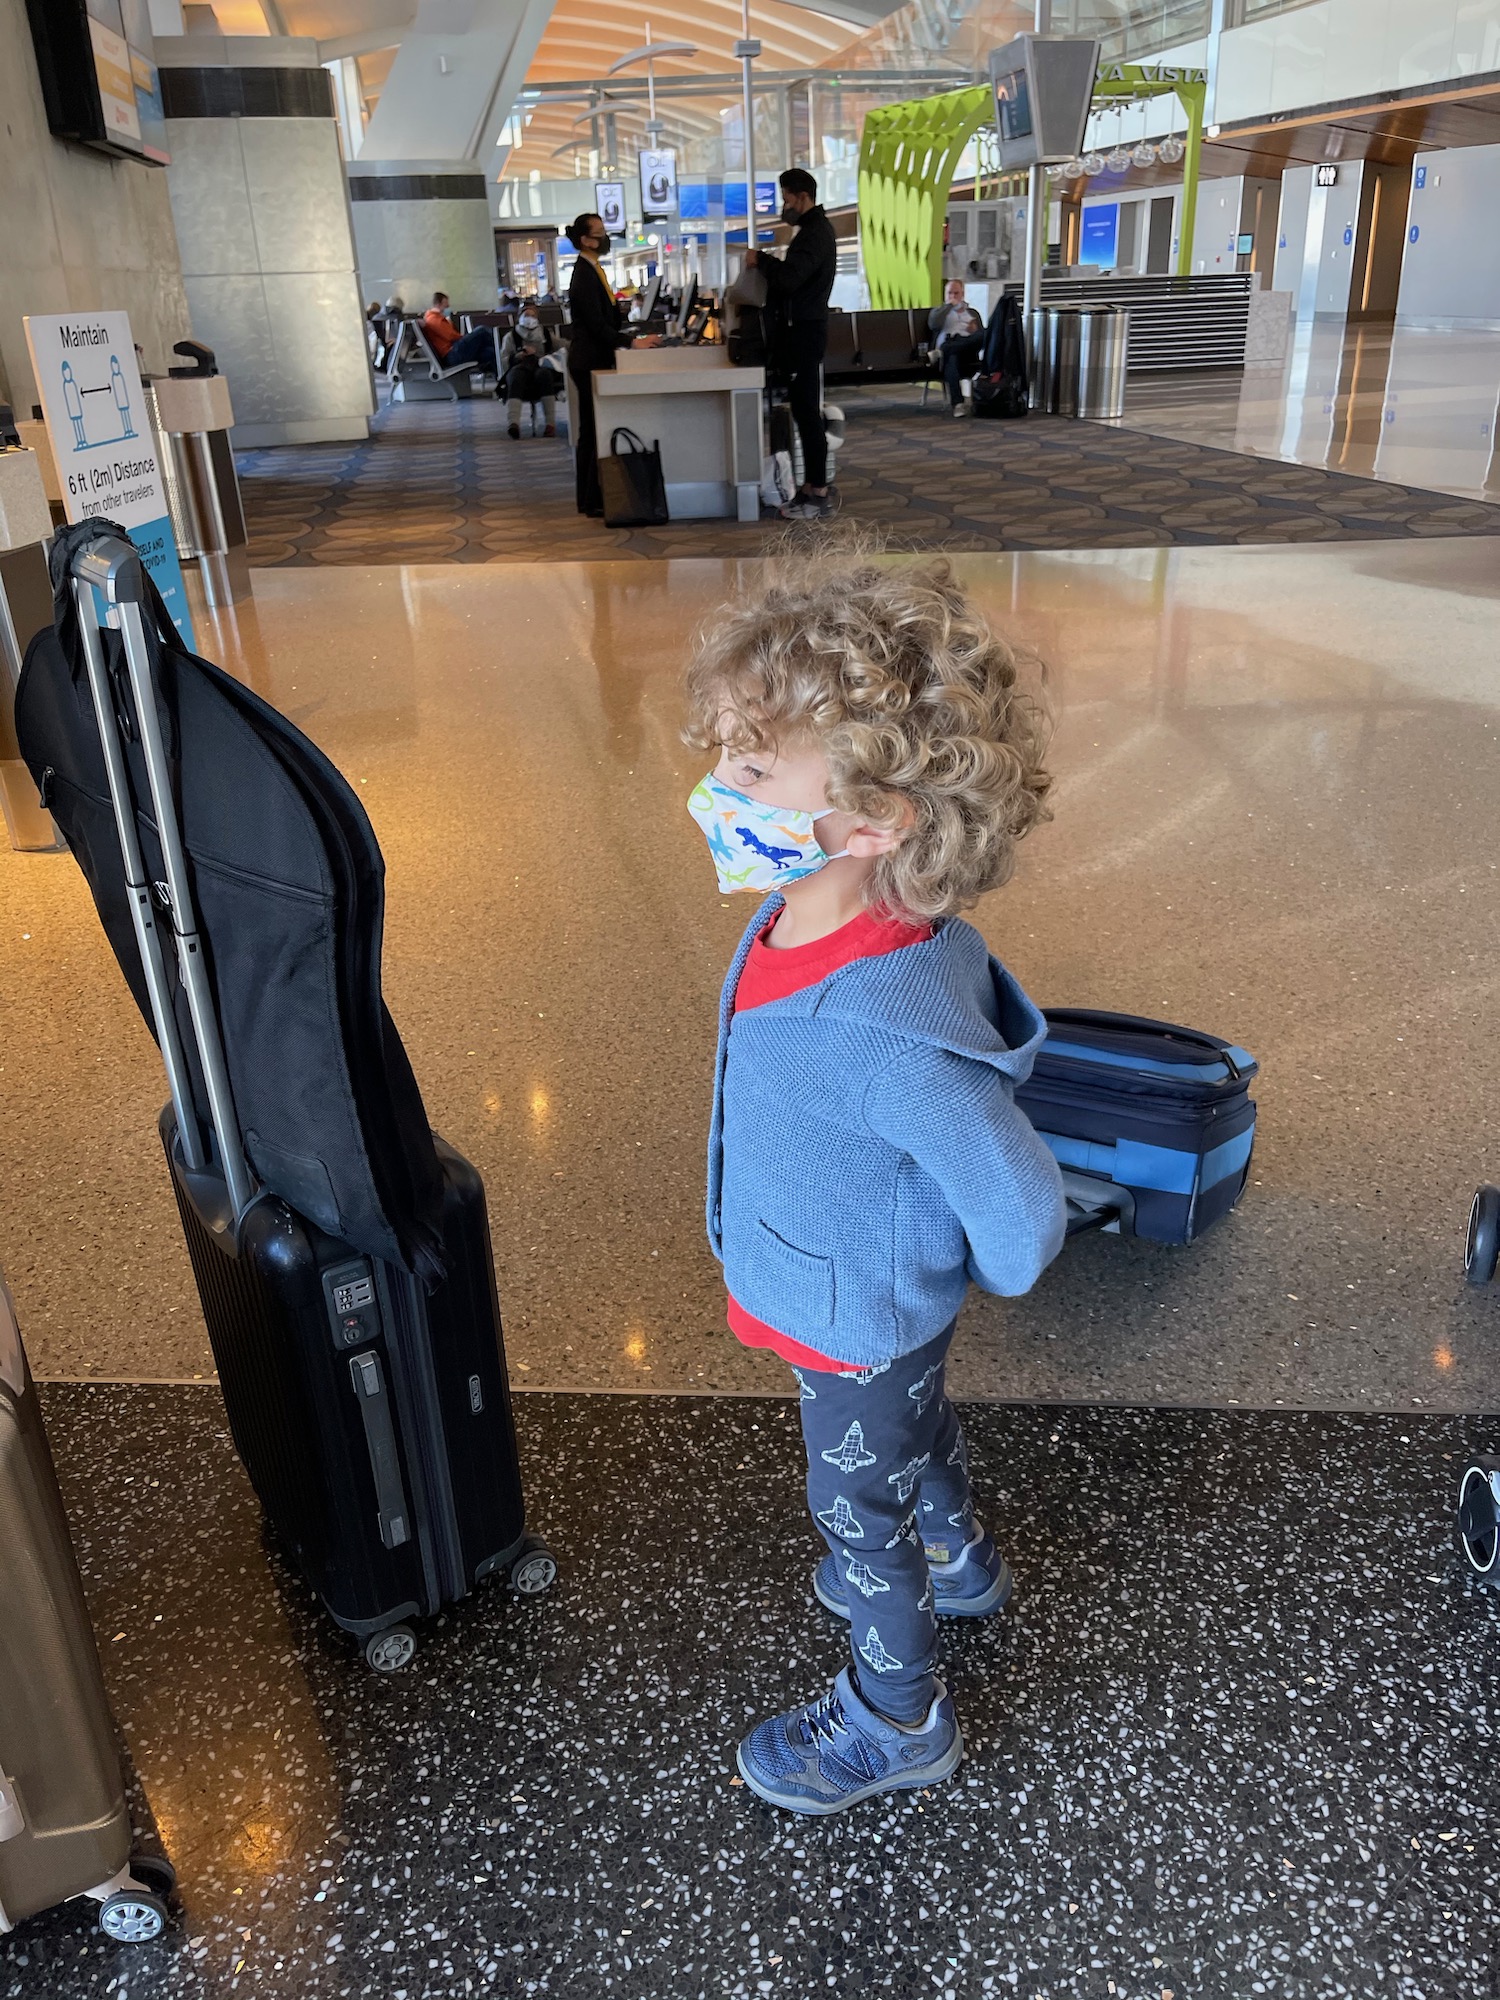 a child wearing a mask standing next to luggage